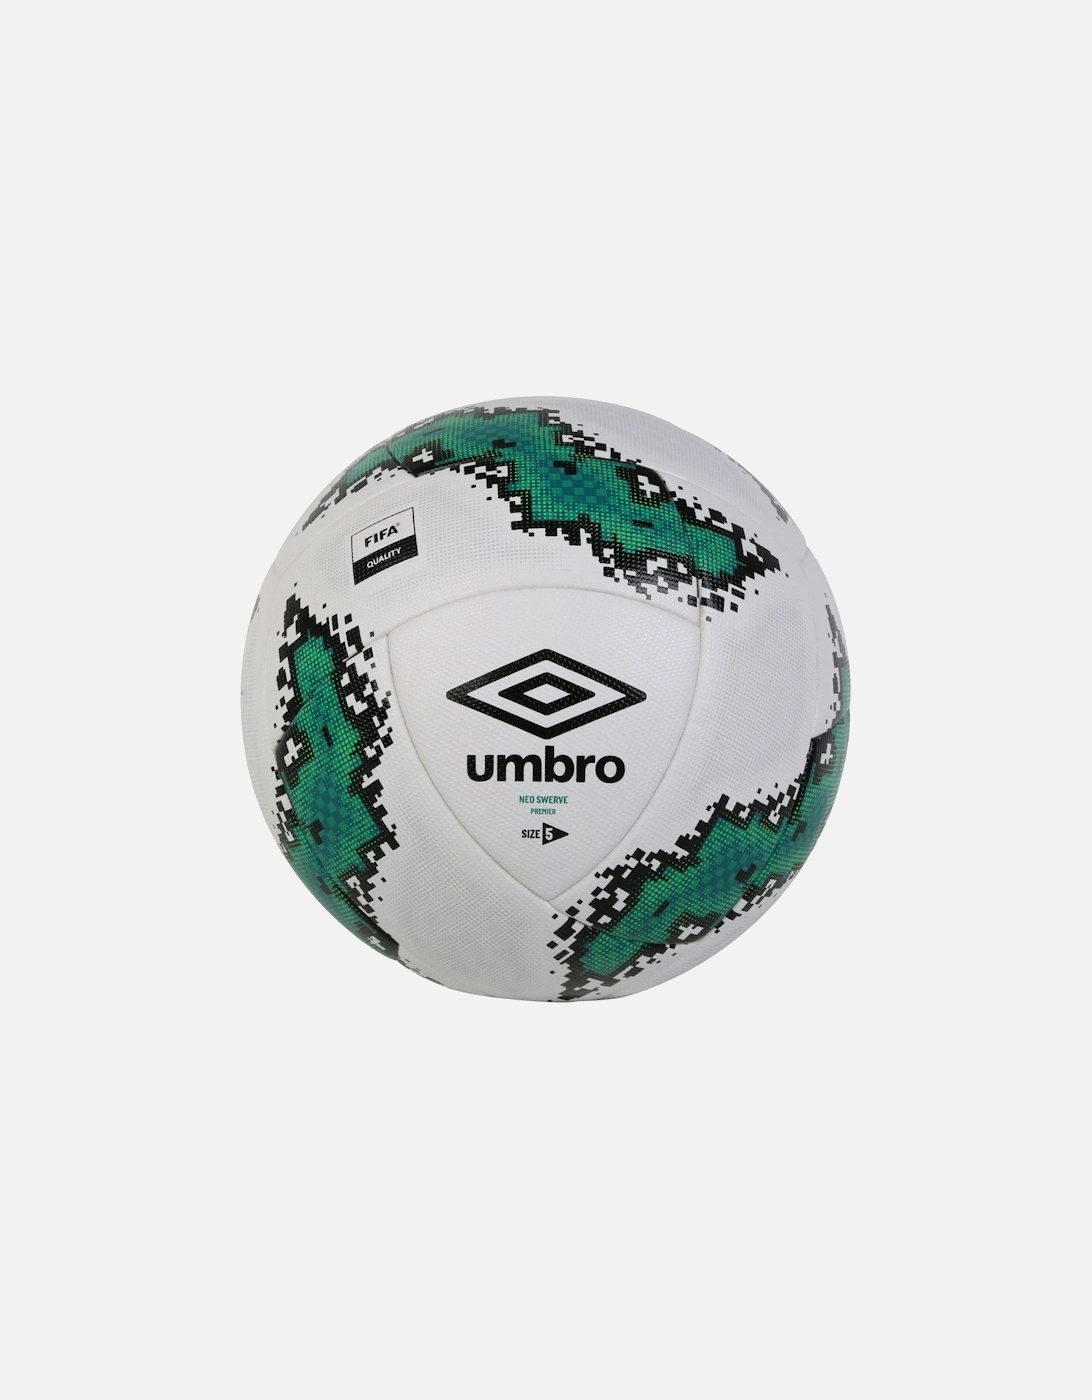 Neo Swerve Premier Fq Football, 2 of 1